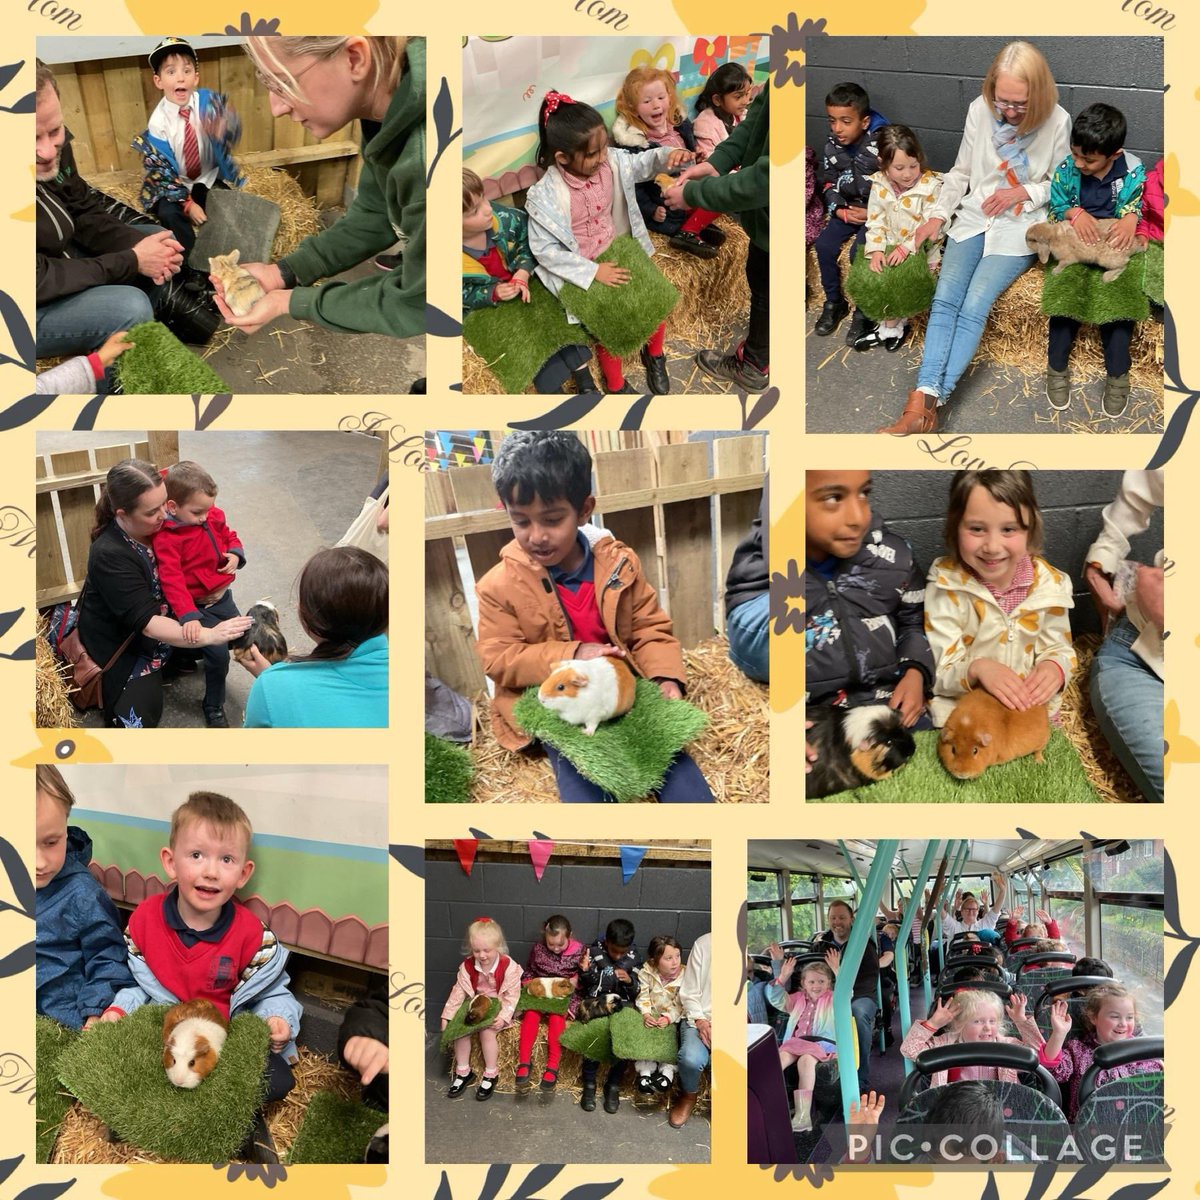 Reception and Nursery had an amazing time on their trip to Reddish Vale Farm. We got to handle some small animals and meet and feed some of the larger animals on the farm. The children represented St Simon’s fantastically and the sun shone. @ReddishValeFarm